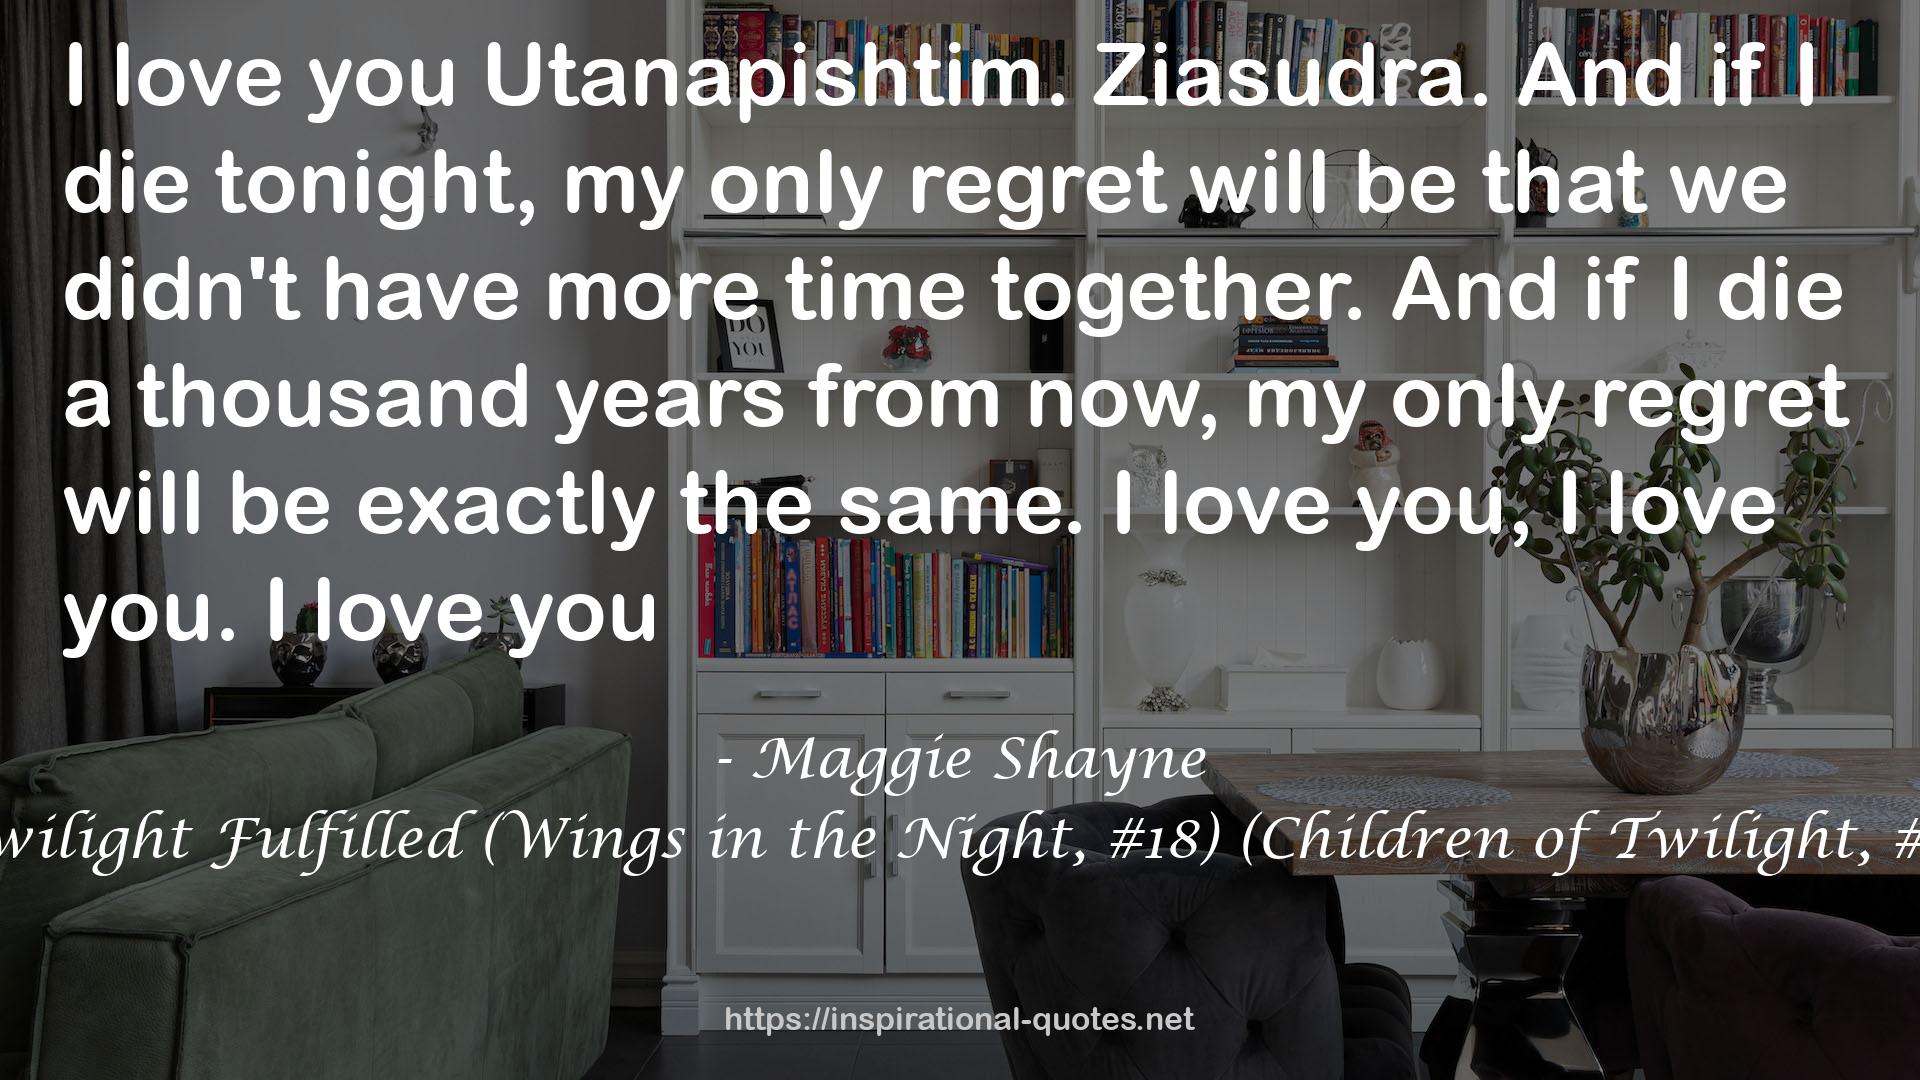 Twilight Fulfilled (Wings in the Night, #18) (Children of Twilight, #2) QUOTES